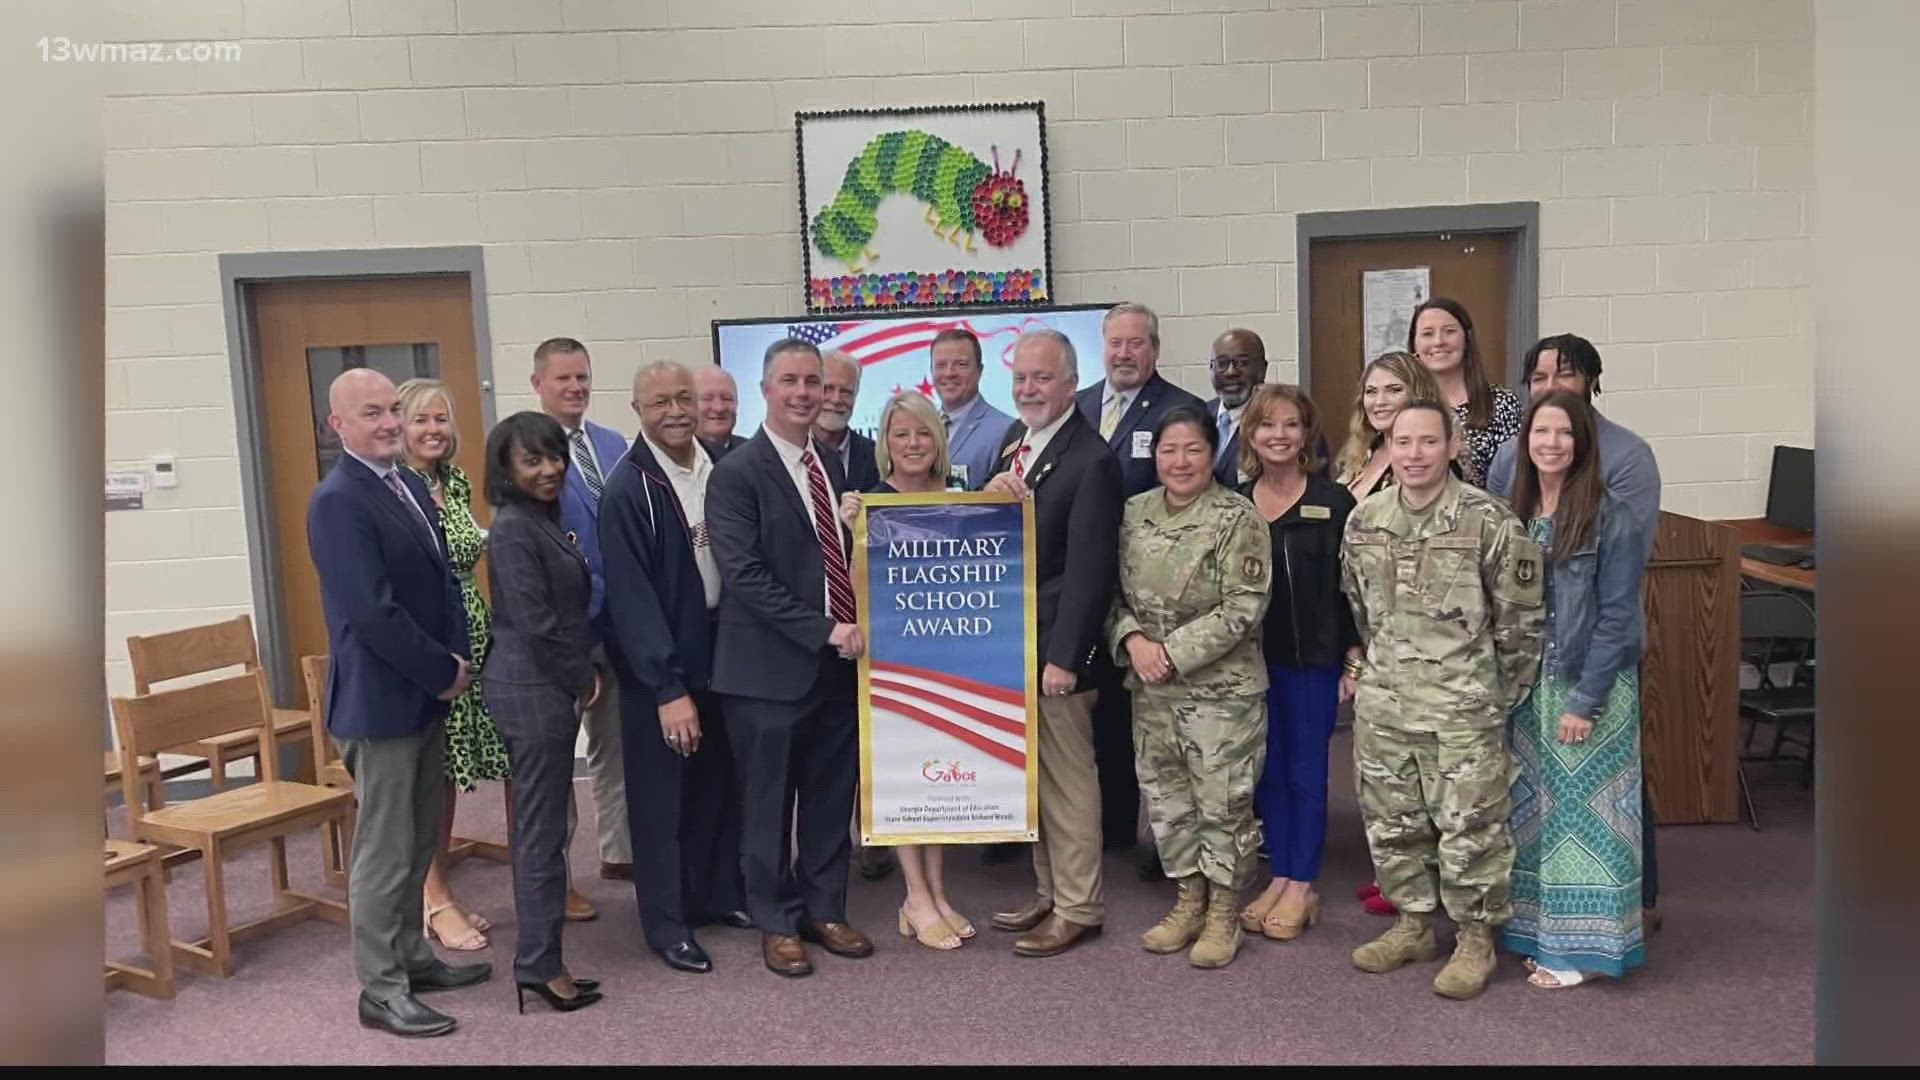 Six Georgia schools were given the Military Flagship School Award, including one right here in Central Georgia!